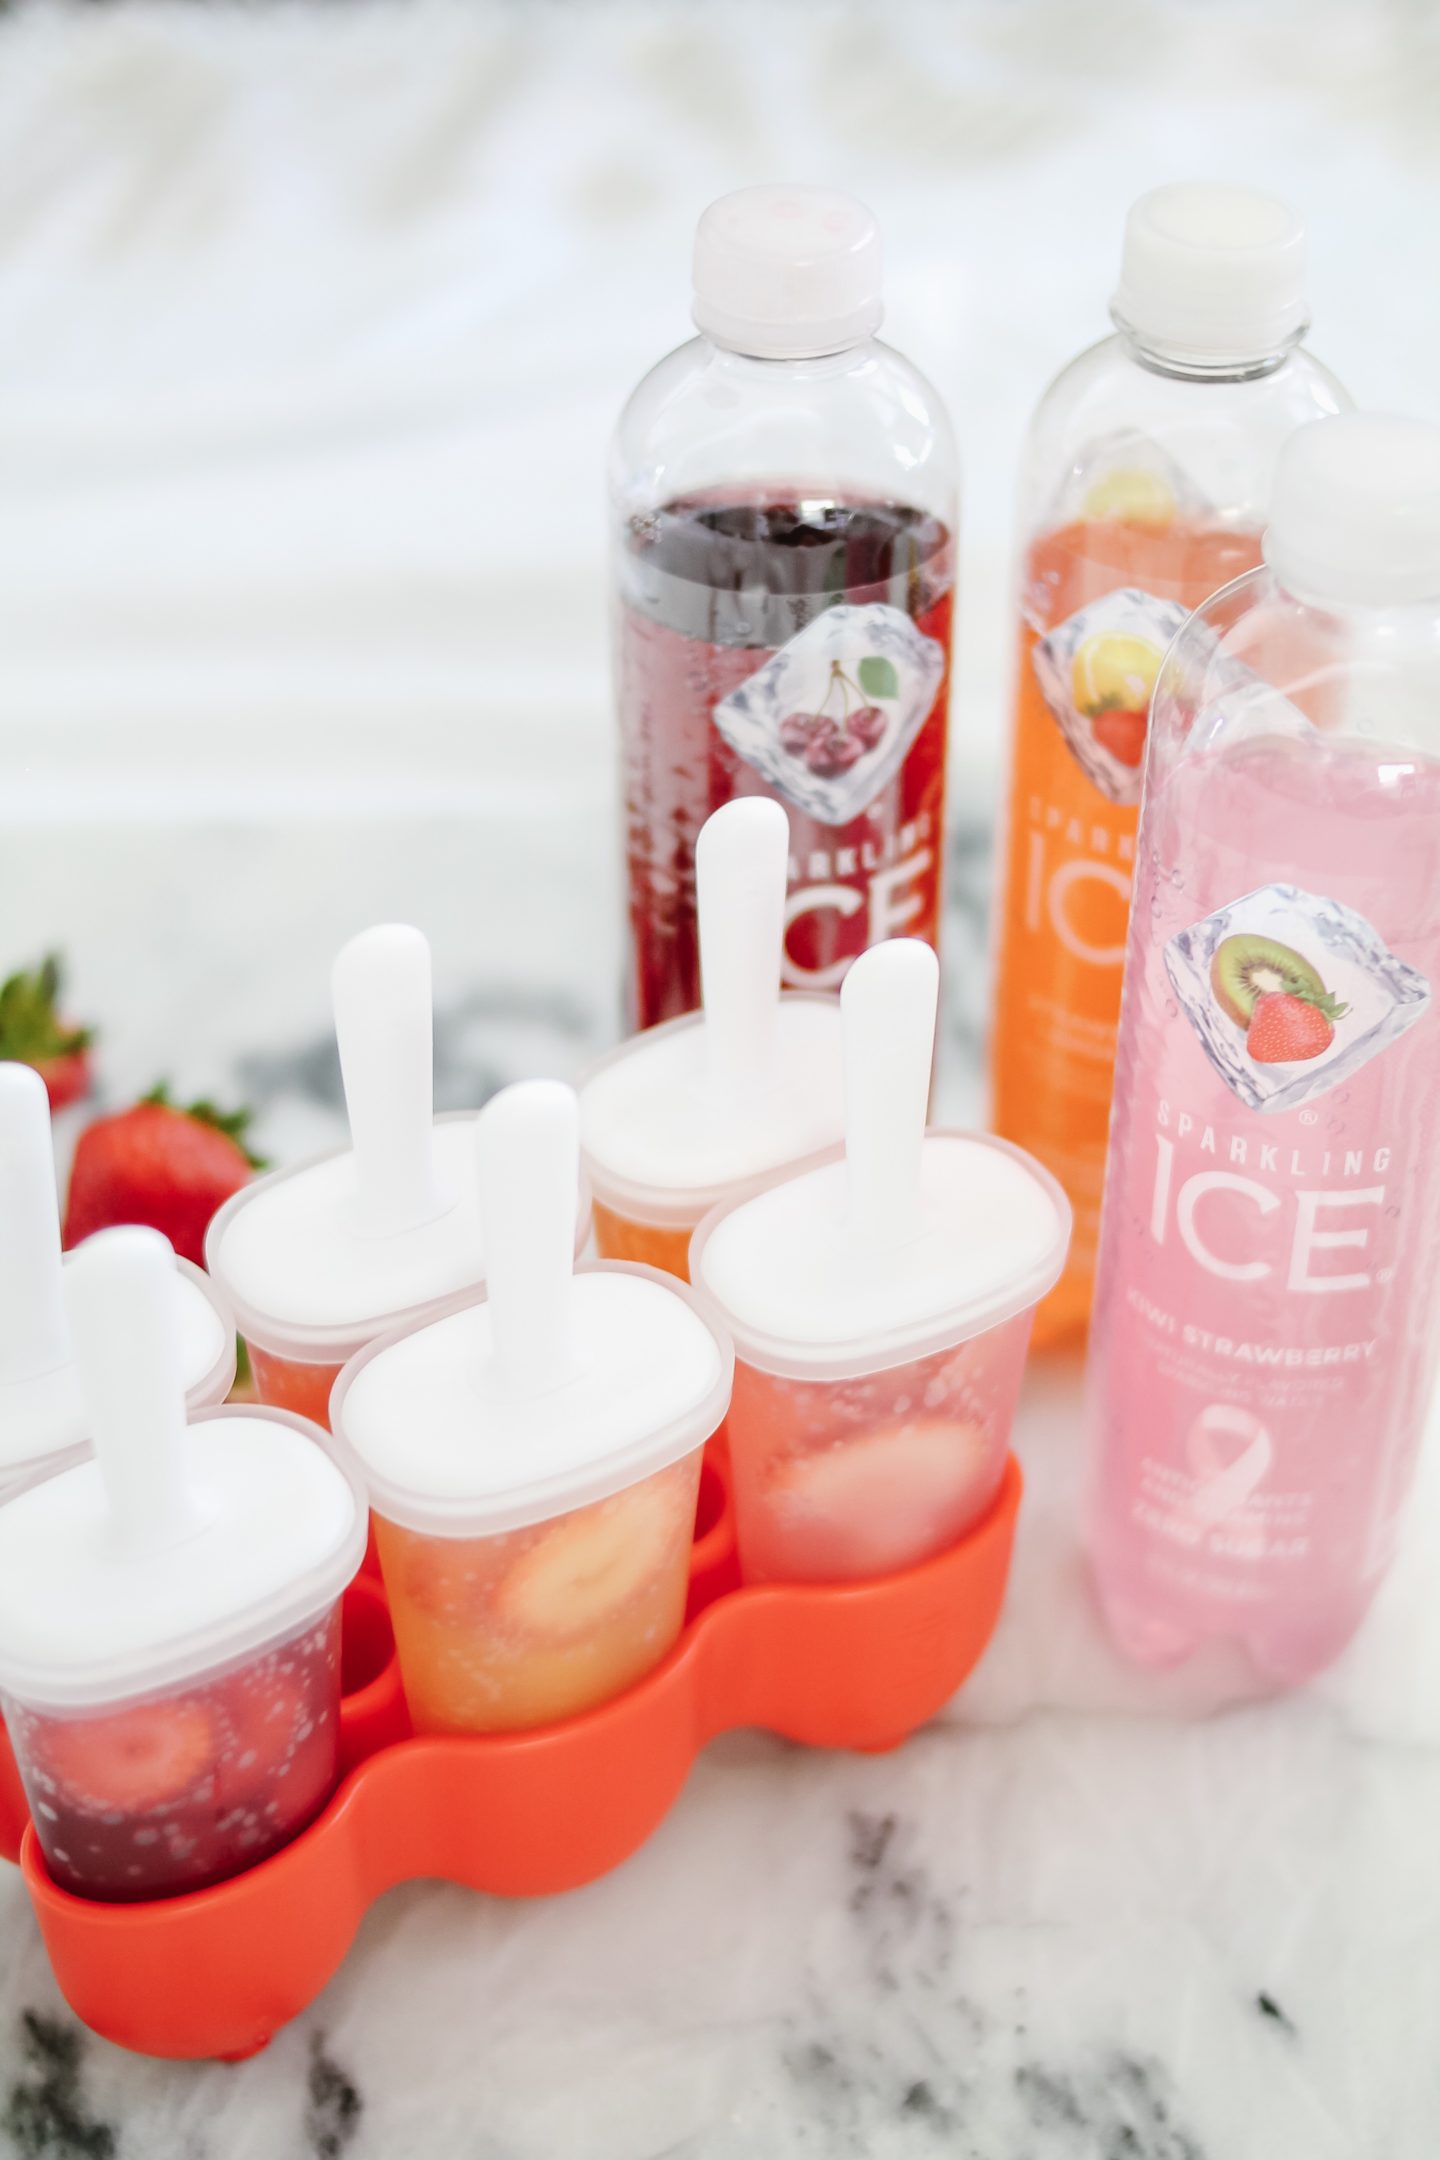 How to make your own popsicles! The easiest and yummiest way I've found with no sugar! #sparklingice #popsicle #diy #kidsactivities